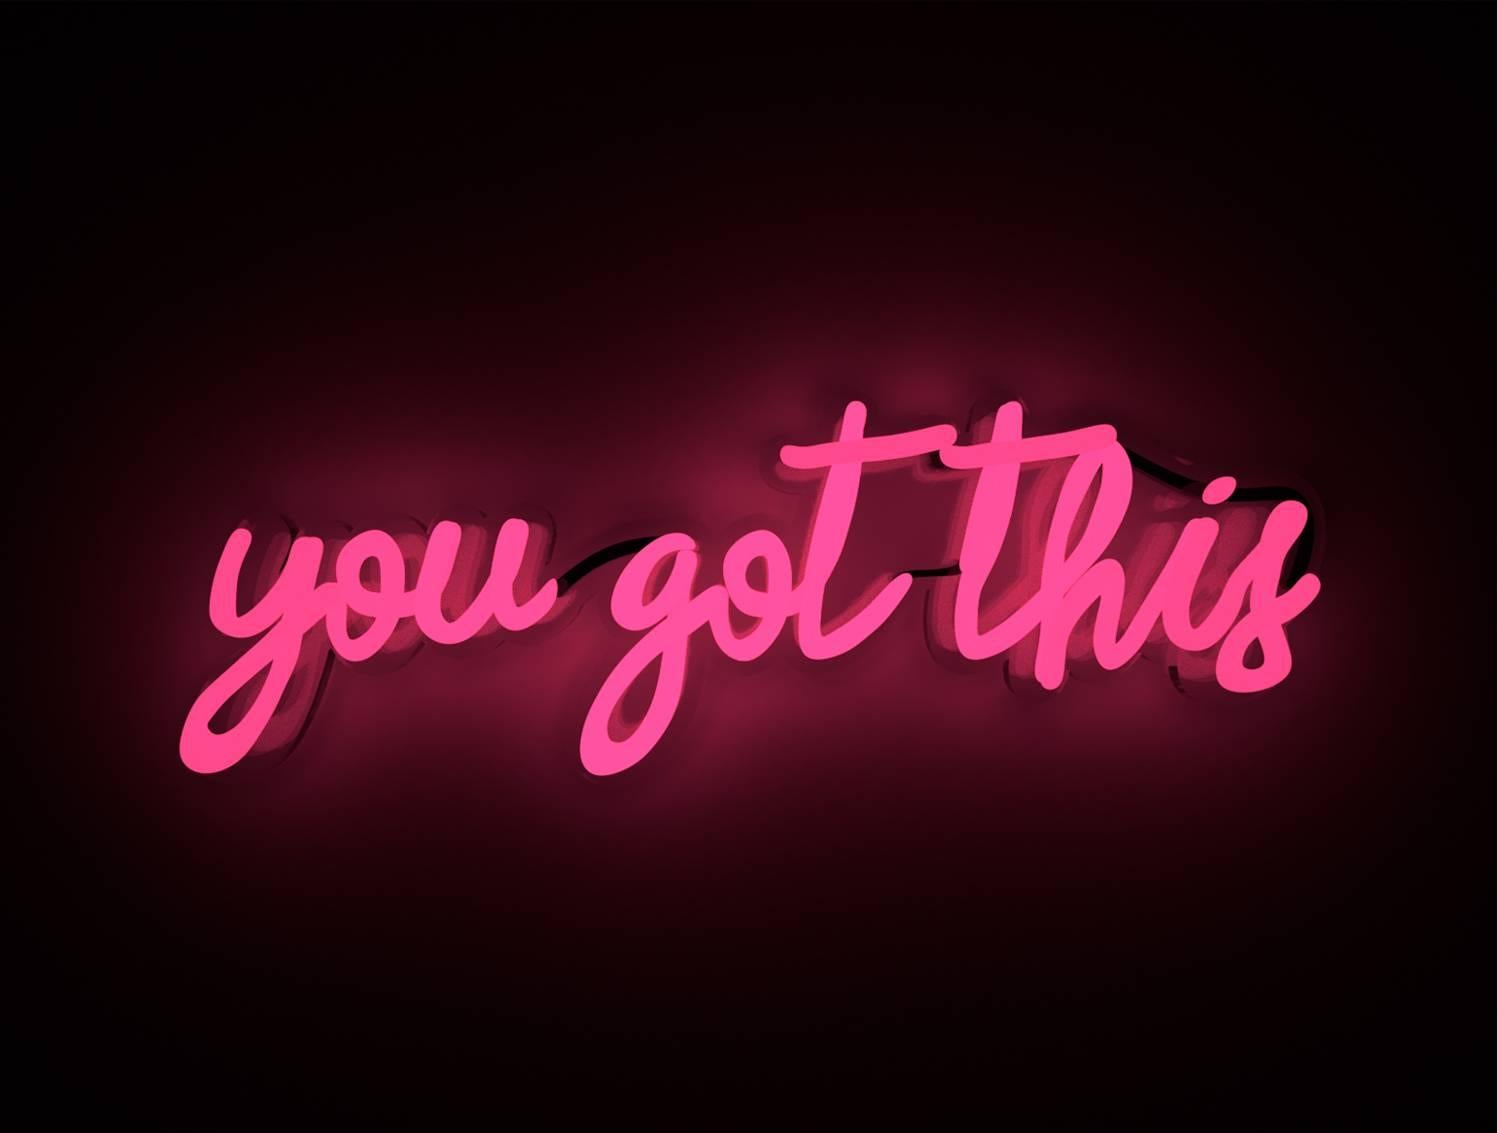 You got this